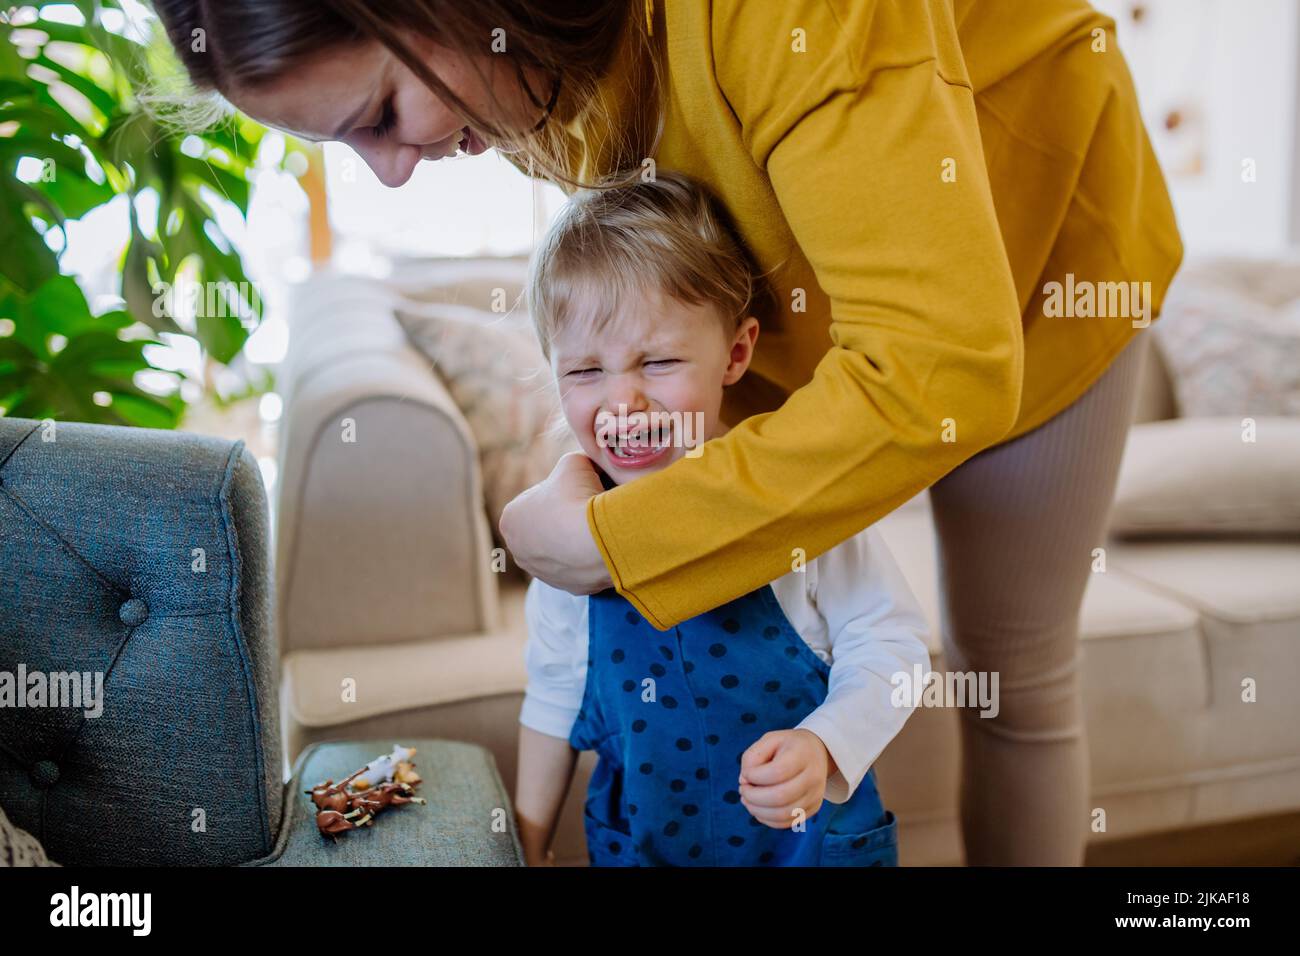 Mother consoling her little crying daughter at home. Stock Photo